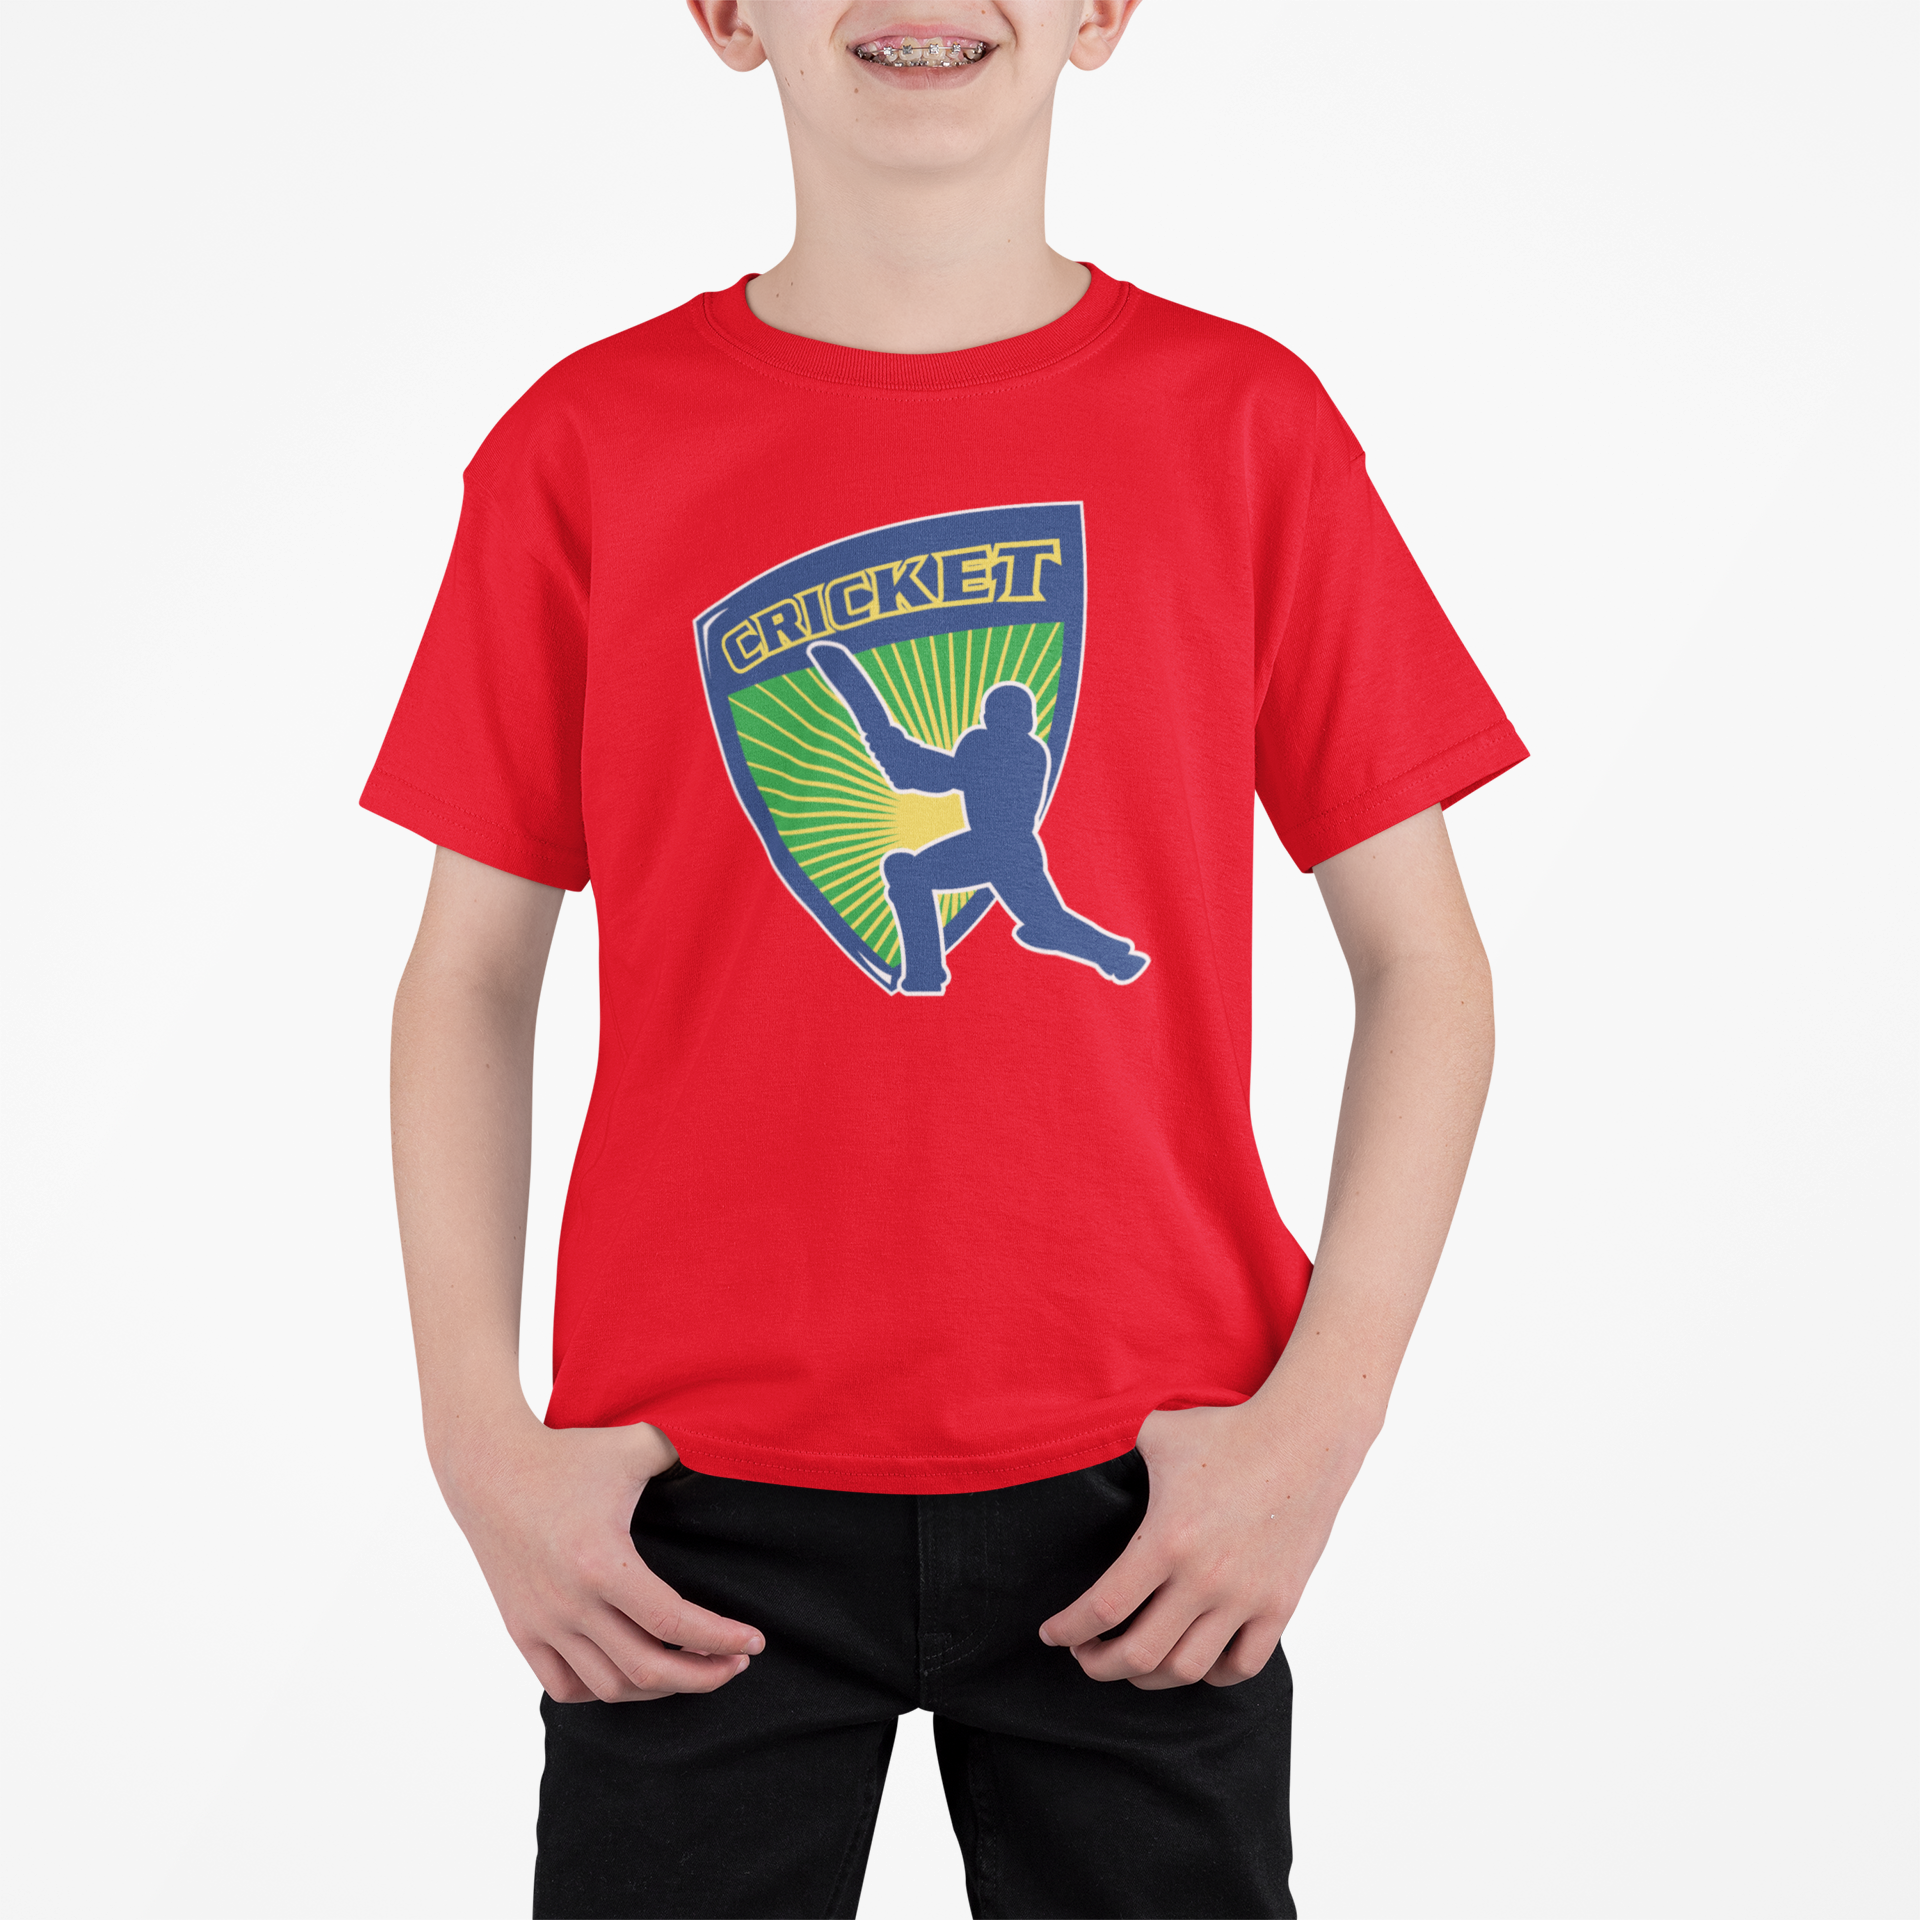 Cricketer T-shirt for Boys Red